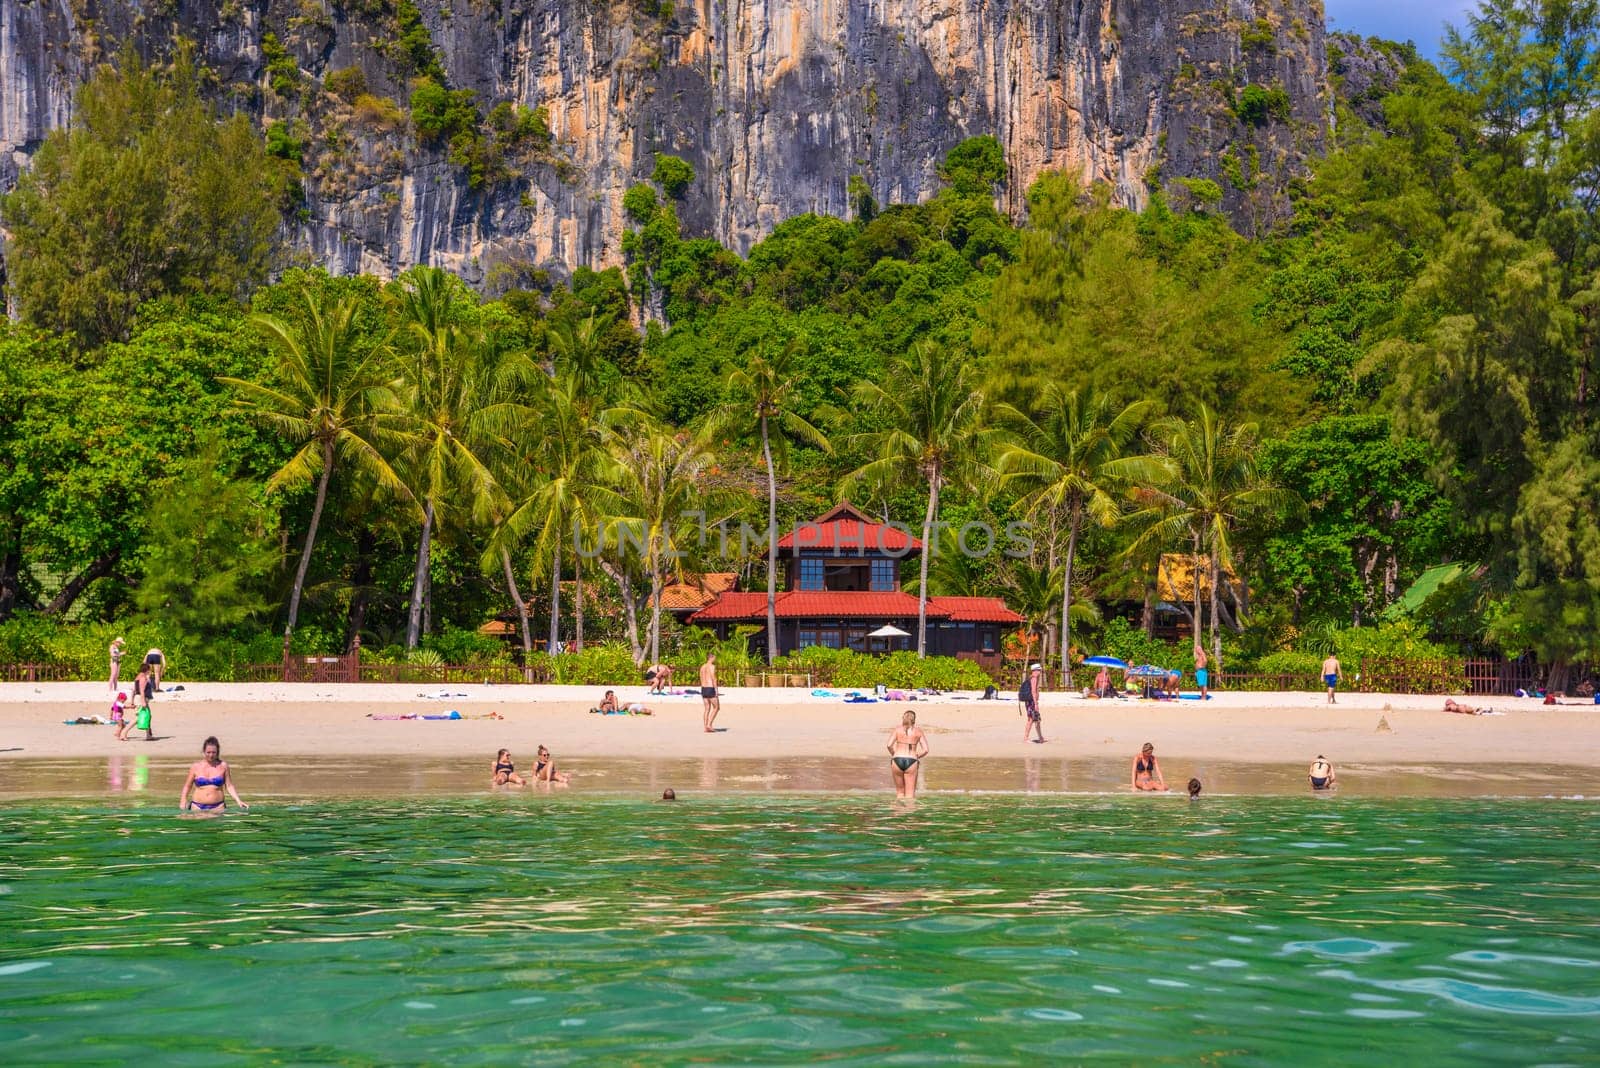 Bungalow house with red roof among coconut palms near the cliffs with people sunbathing and swimming in emerald water on Railay beach west, Ao Nang, Krabi, Thailand by Eagle2308